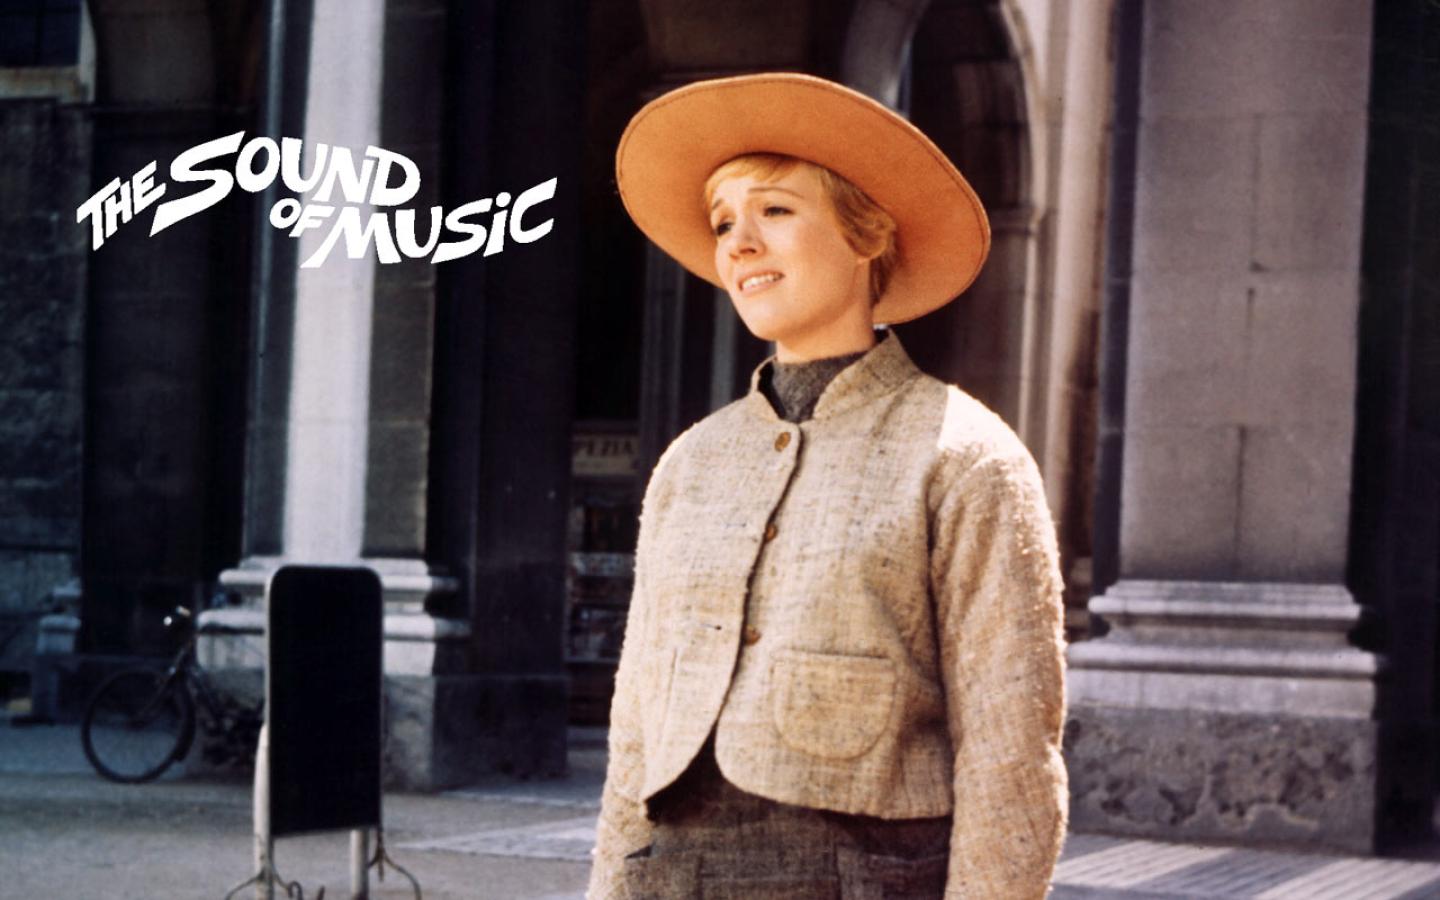 The Sound Of Music Wallpaper #3 1440 x 900 